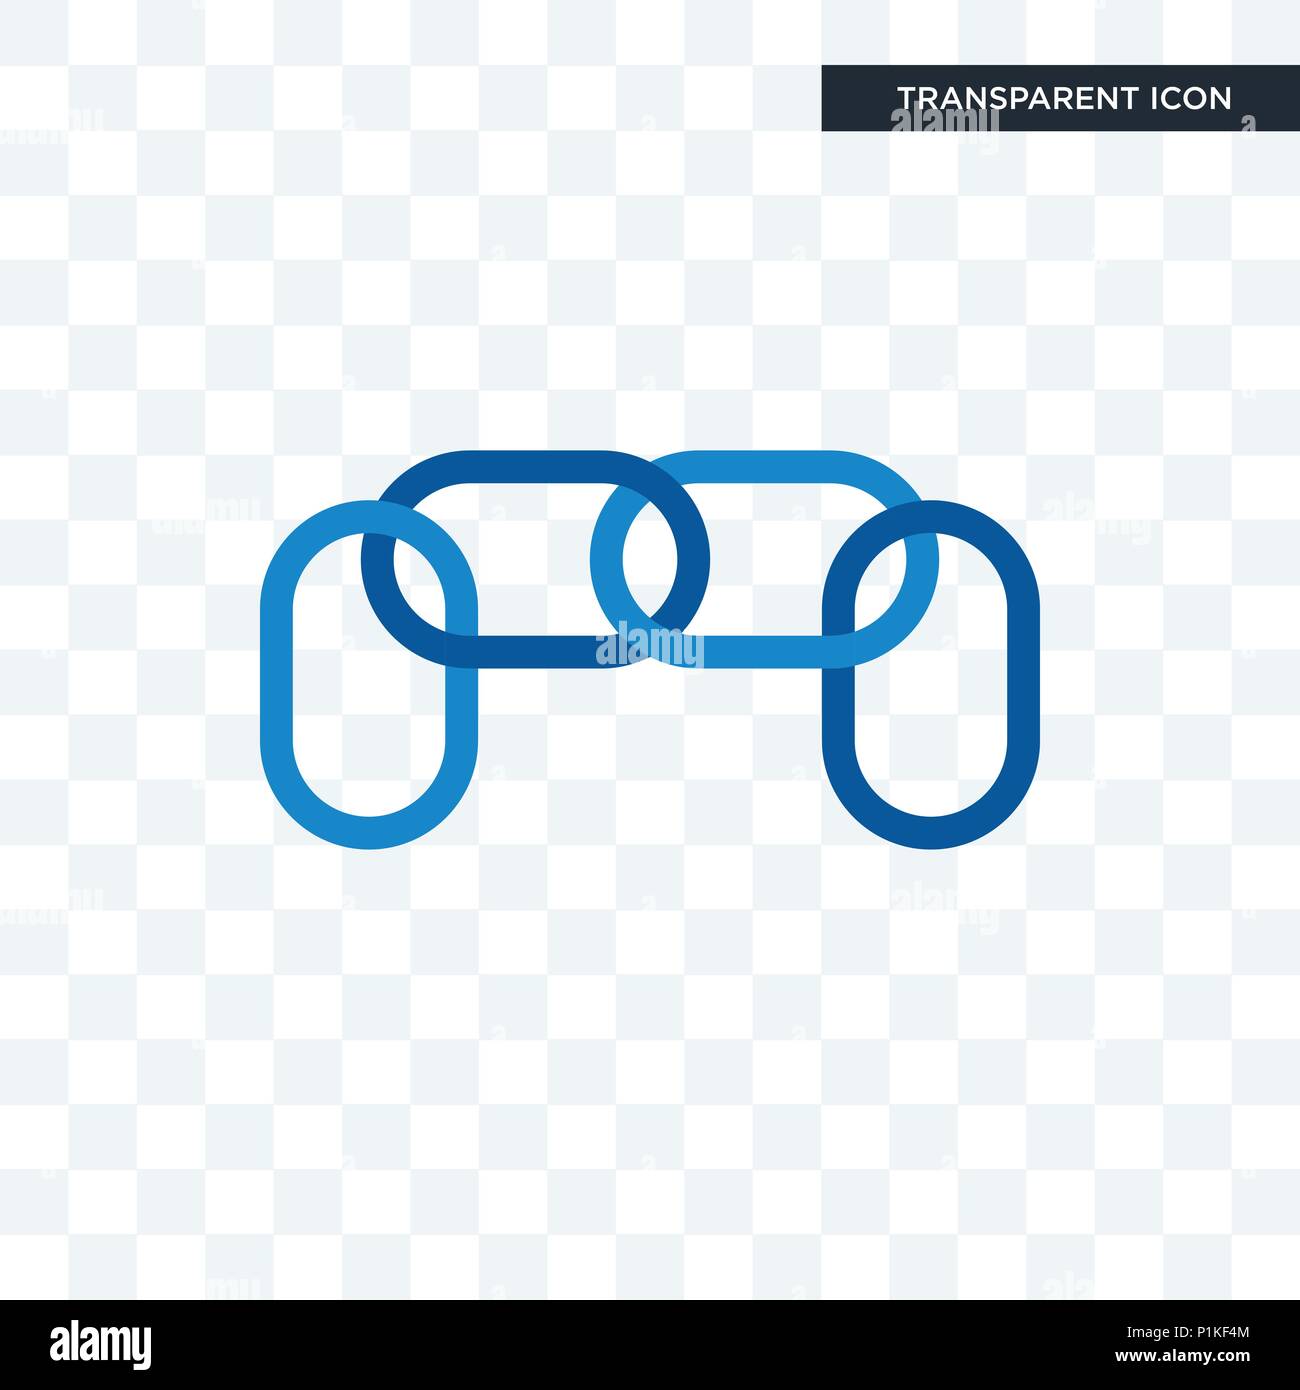 chainlink vector icon isolated on transparent background, chainlink logo concept Stock Vector